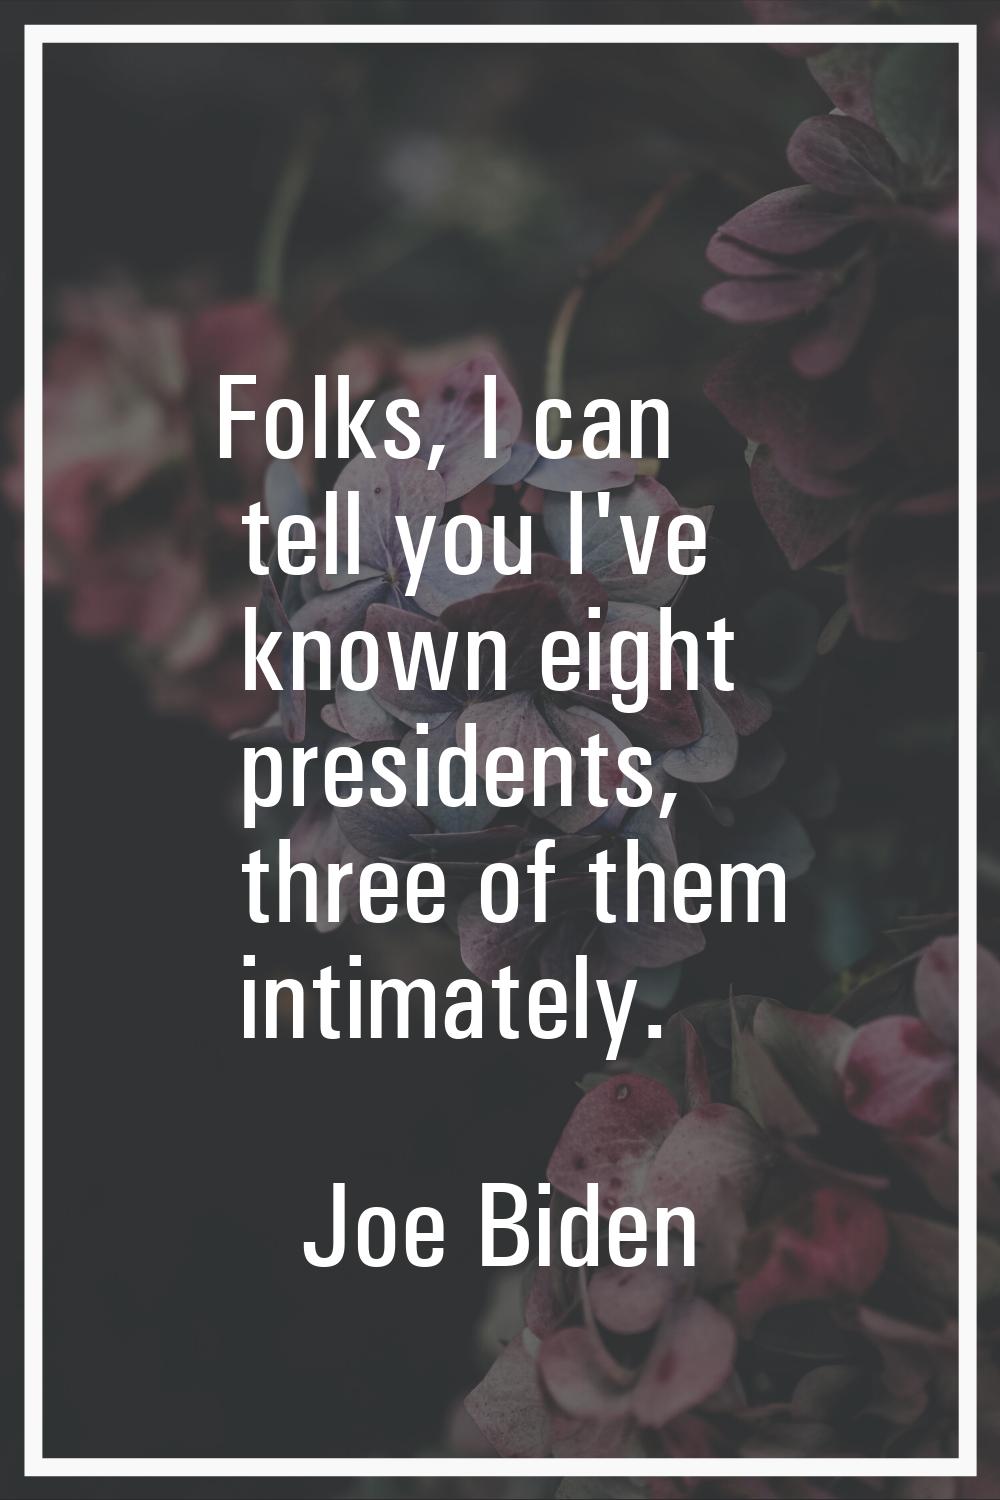 Folks, I can tell you I've known eight presidents, three of them intimately.